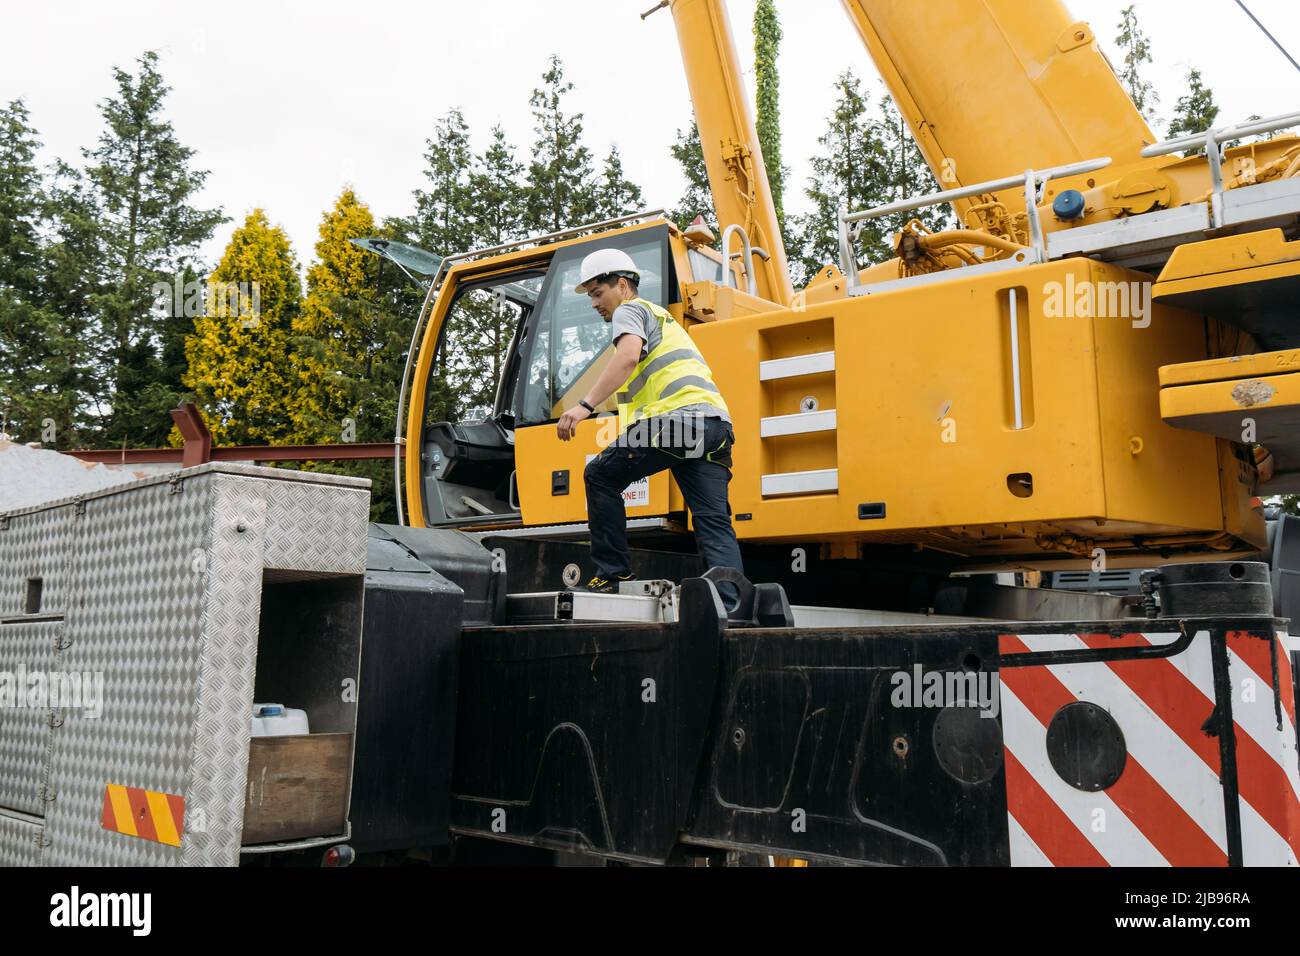 Operator climbing on Construction crane lifting heavy freight. Modern mobile transportation technologies help building house. Real estate professional Stock Photo